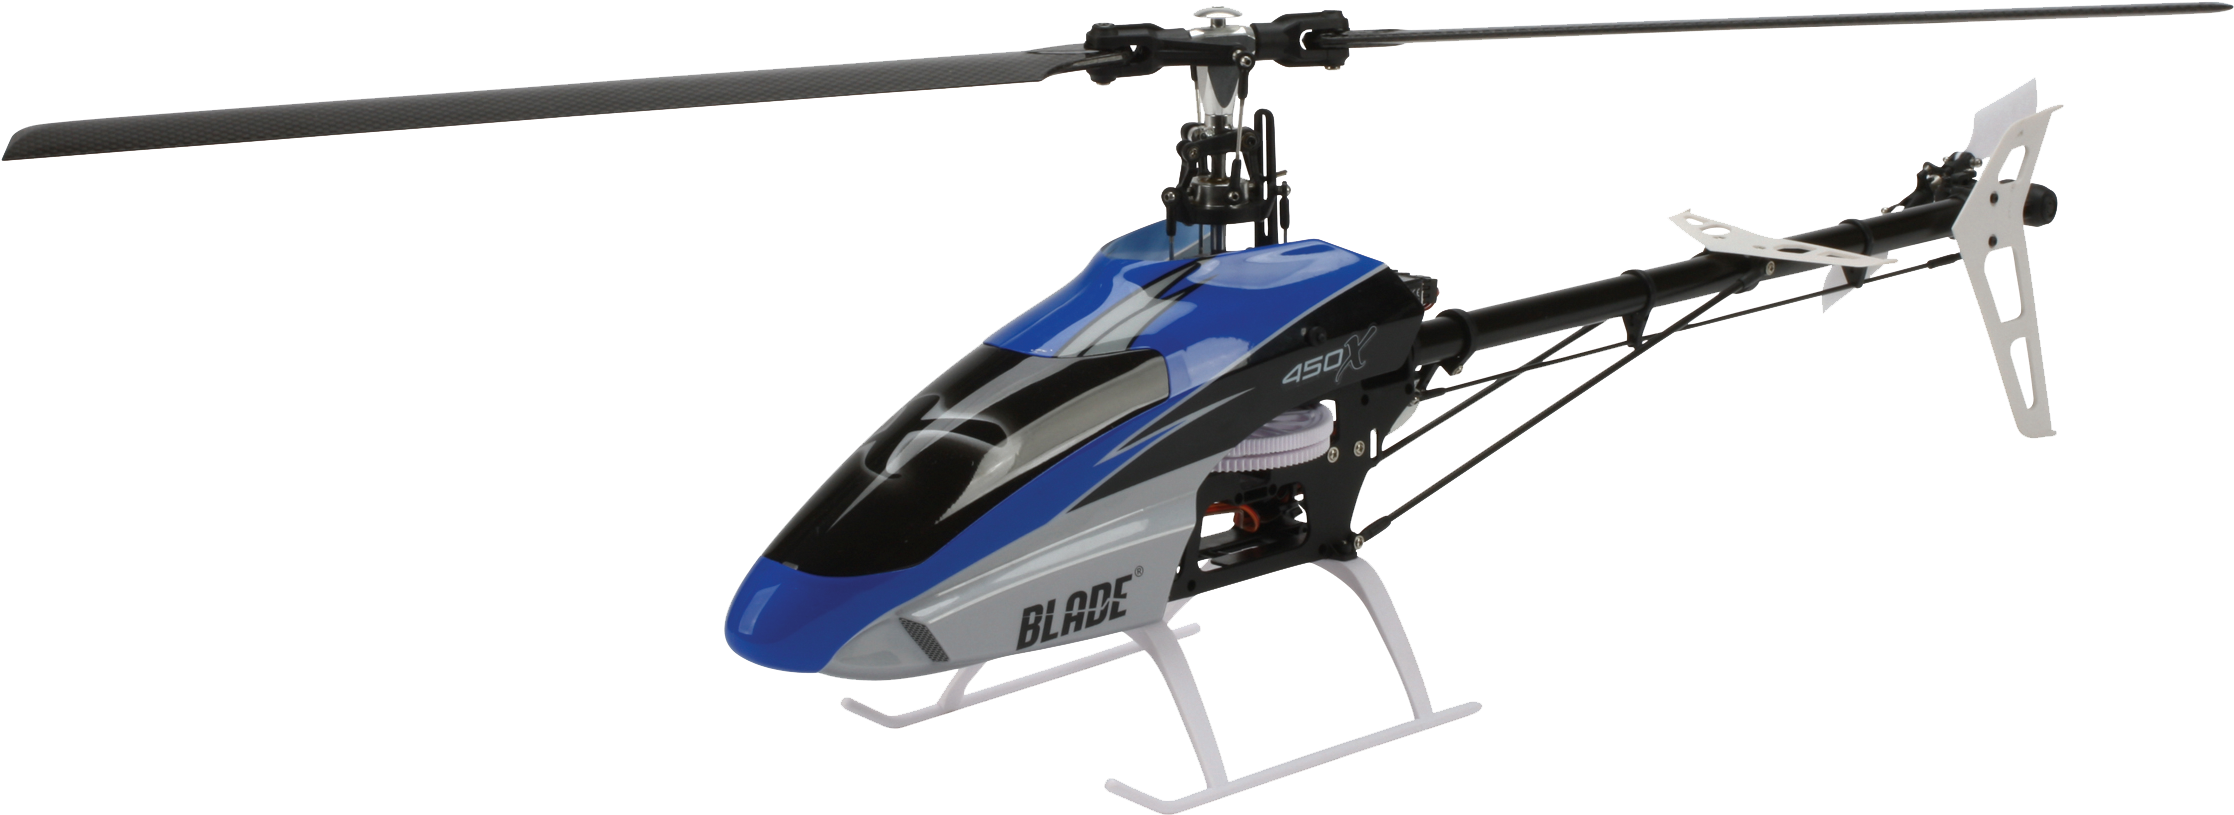 Helicopter Png Image Helice Helicoptero Png